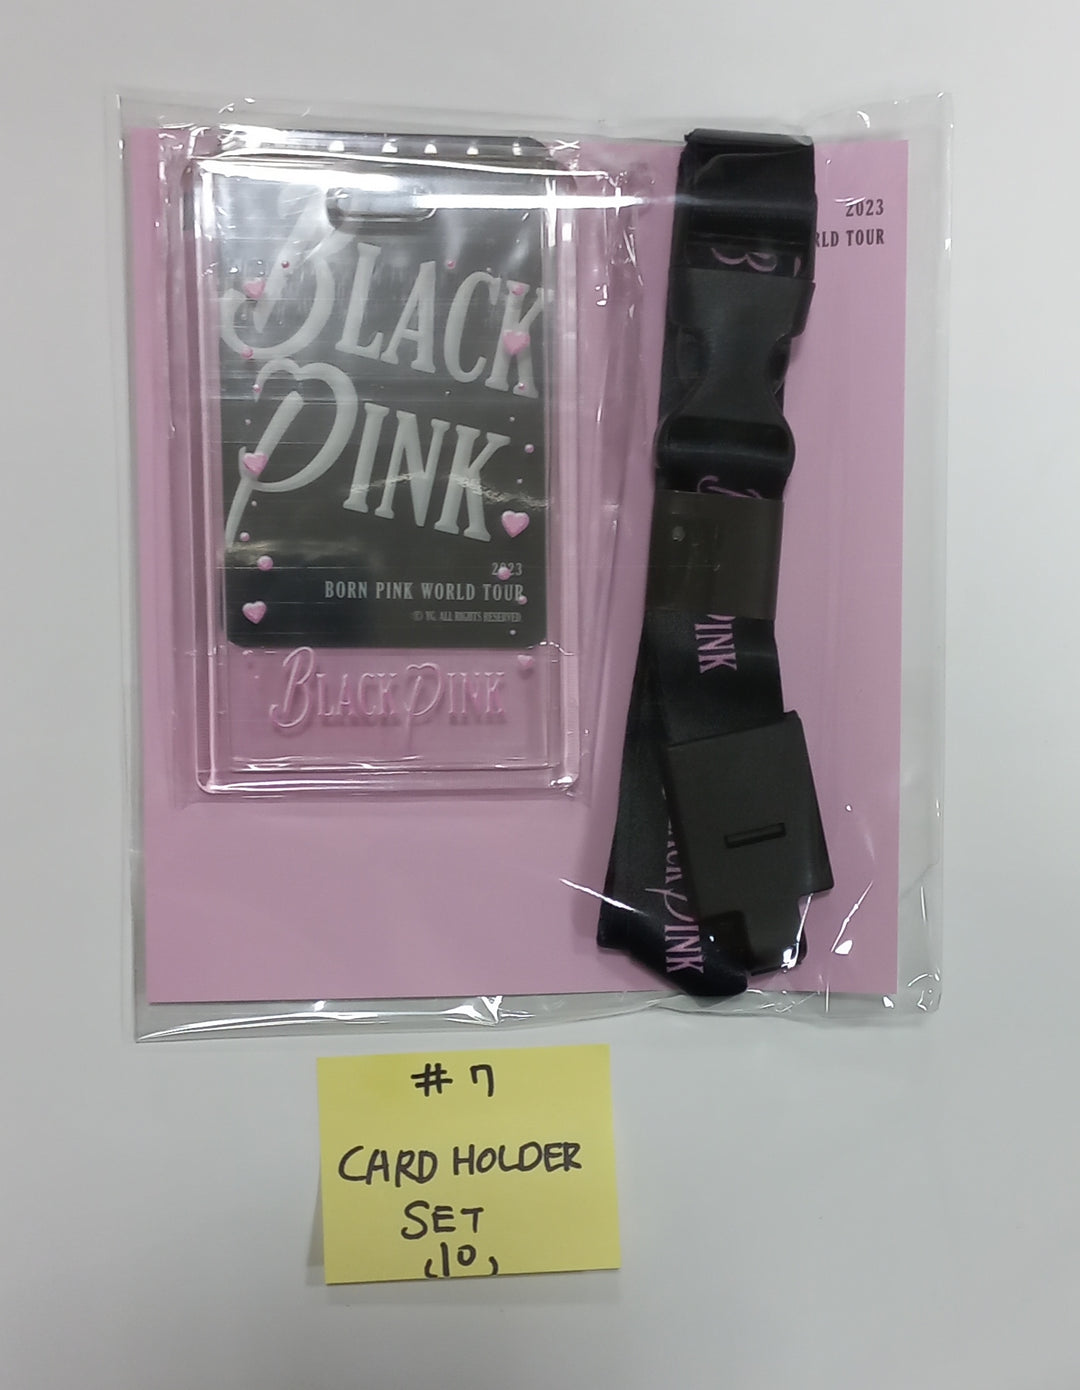 BlackPink - "Born Pink" World Tour Finale in Seoul - Official MD (1) [23.09.16]